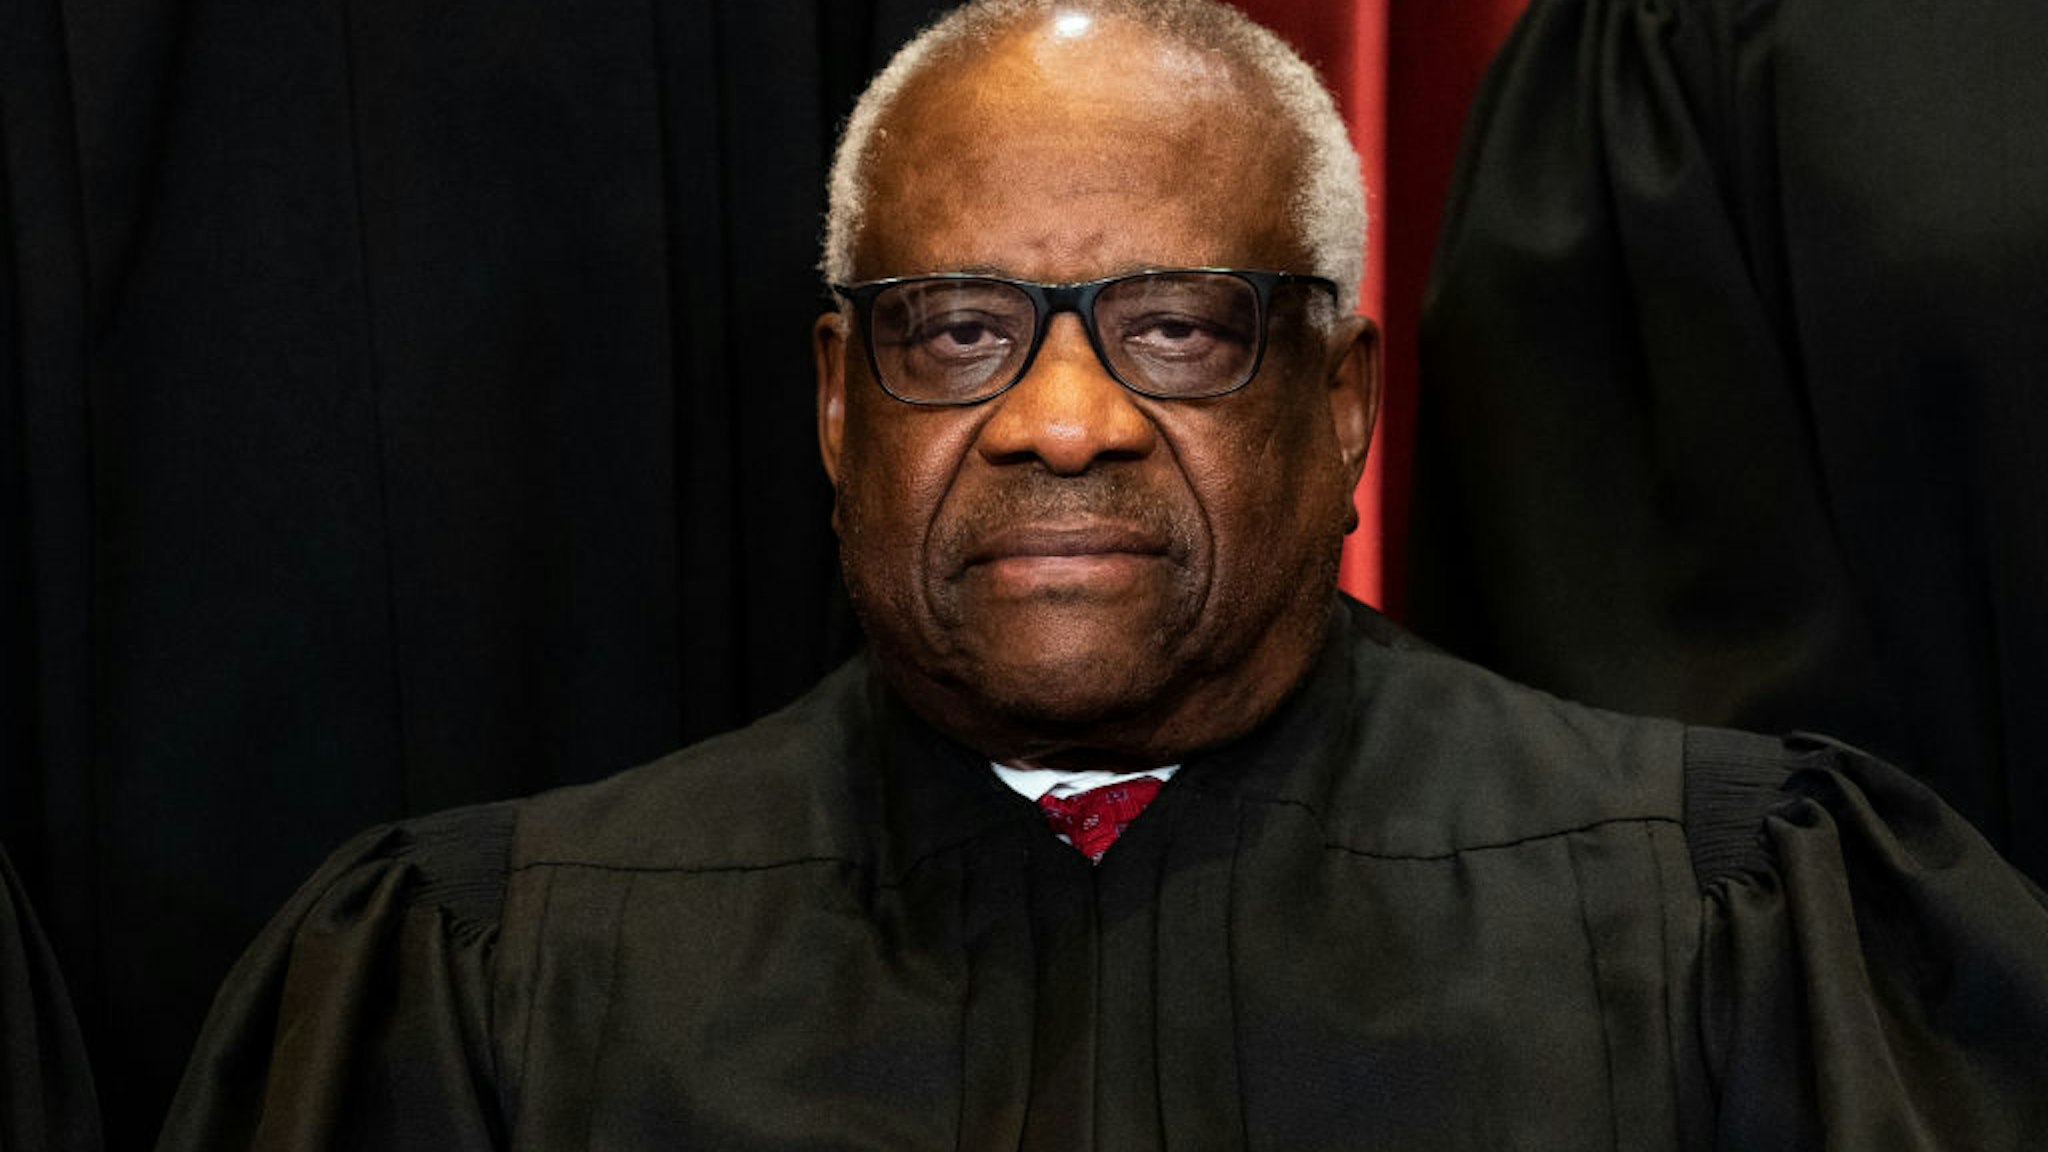 Associate Justice Clarence Thomas sits during a group photo of the Justices at the Supreme Court in Washington, DC on April 23, 2021.